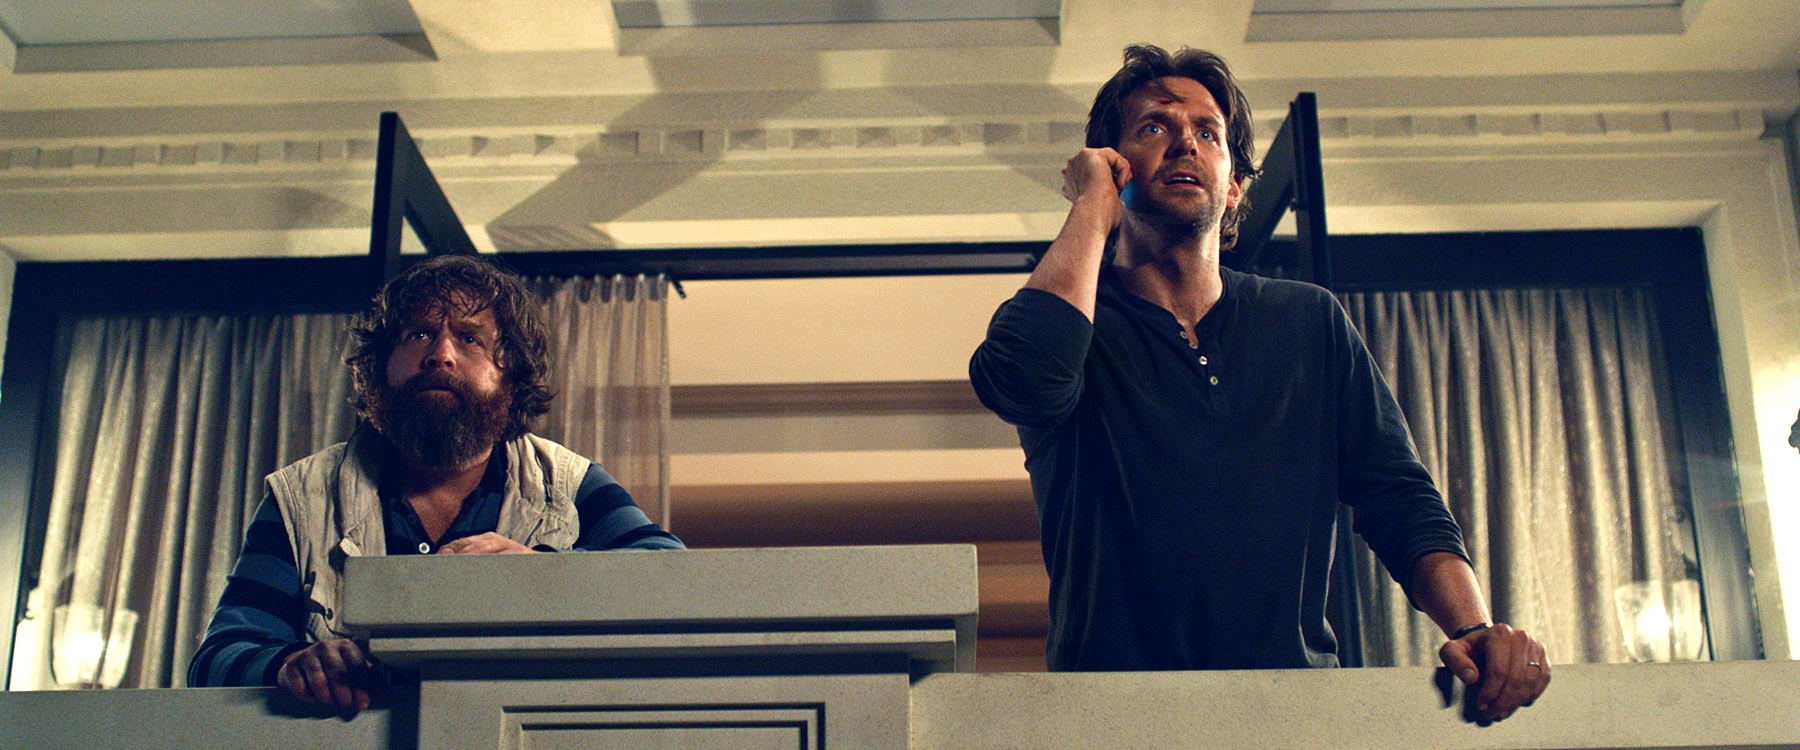 Zach Galifianakis stars as Alan and Bradley Cooper stars as Phil in Warner Bros. Pictures' The Hangover Part III (2013)